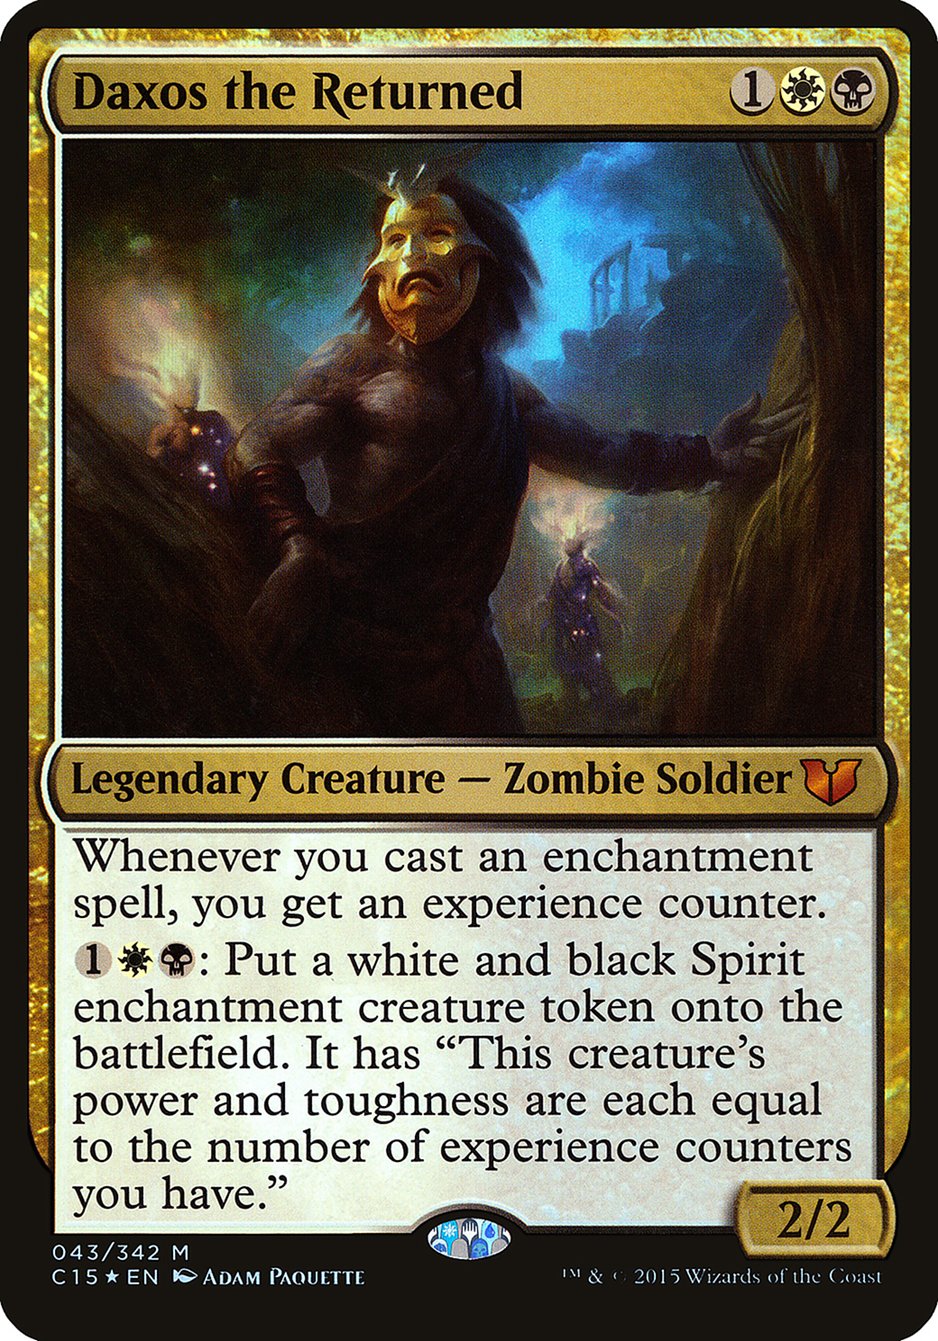 Daxos the Returned - MTG Card versions